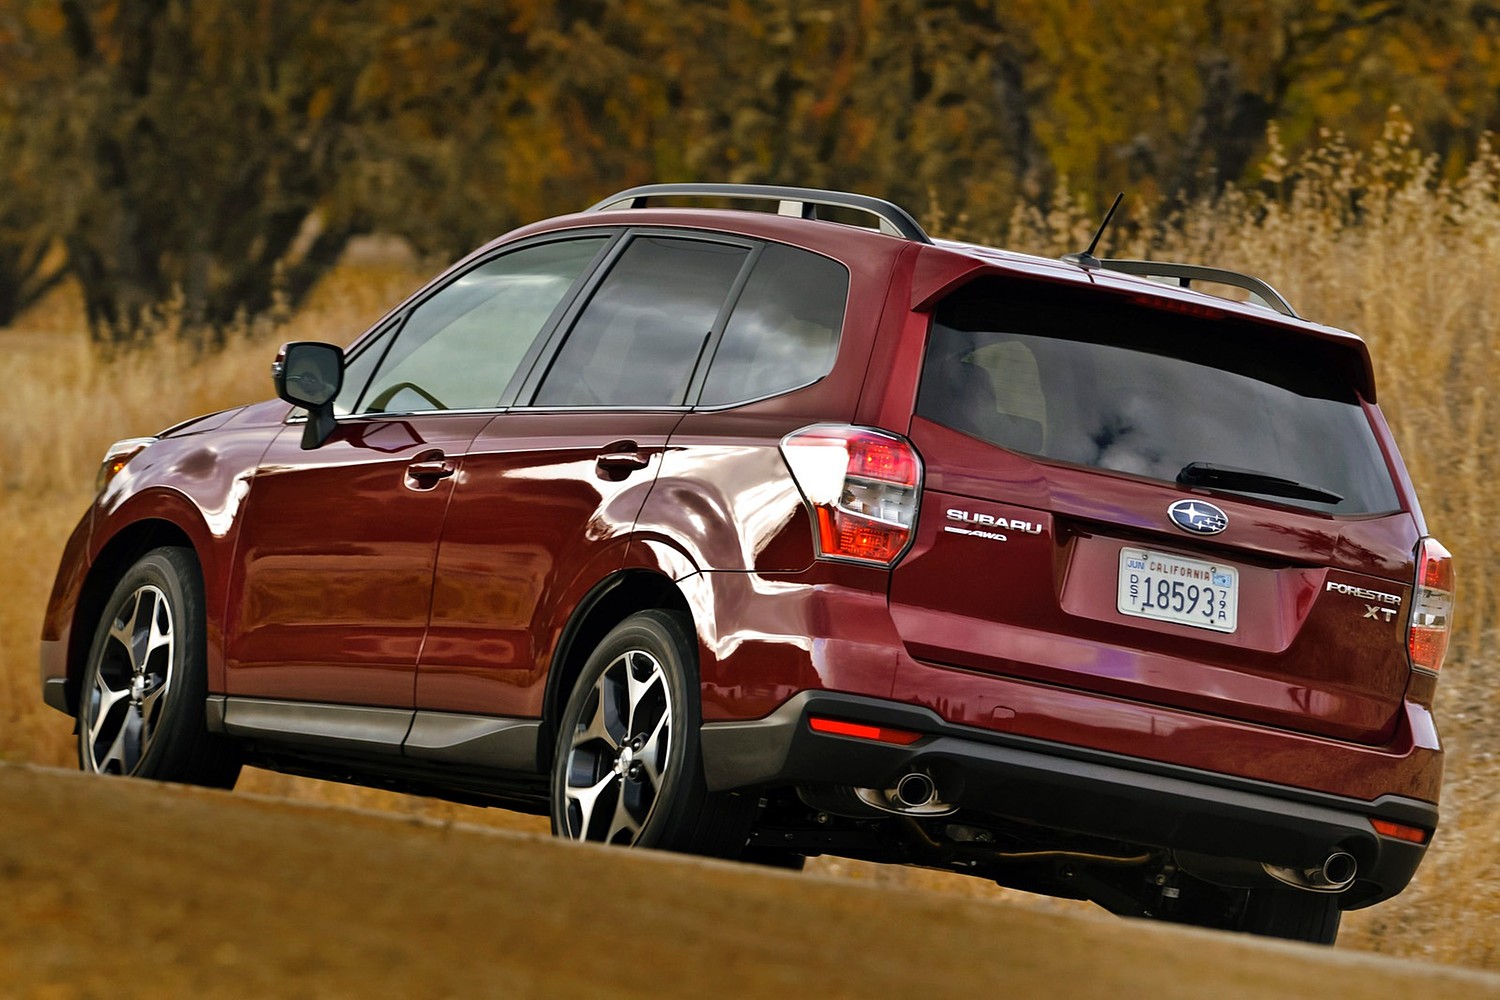 Subaru Forester 2.0XT Touring 4dr SUV Exterior Shown (2015 model year shown)